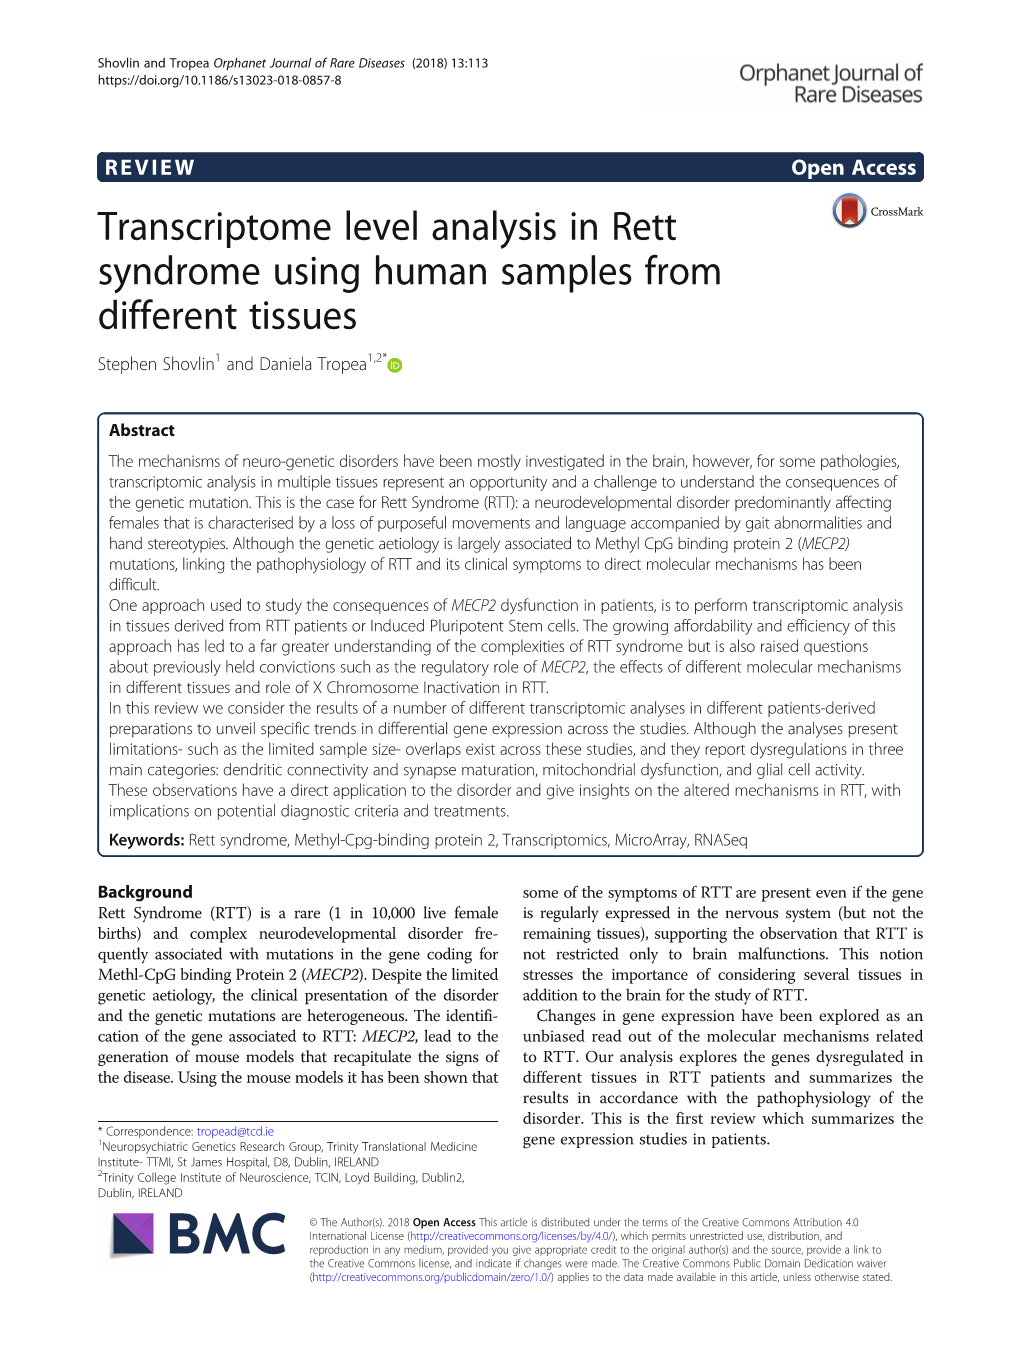 Transcriptome Level Analysis in Rett Syndrome Using Human Samples from Different Tissues Stephen Shovlin1 and Daniela Tropea1,2*